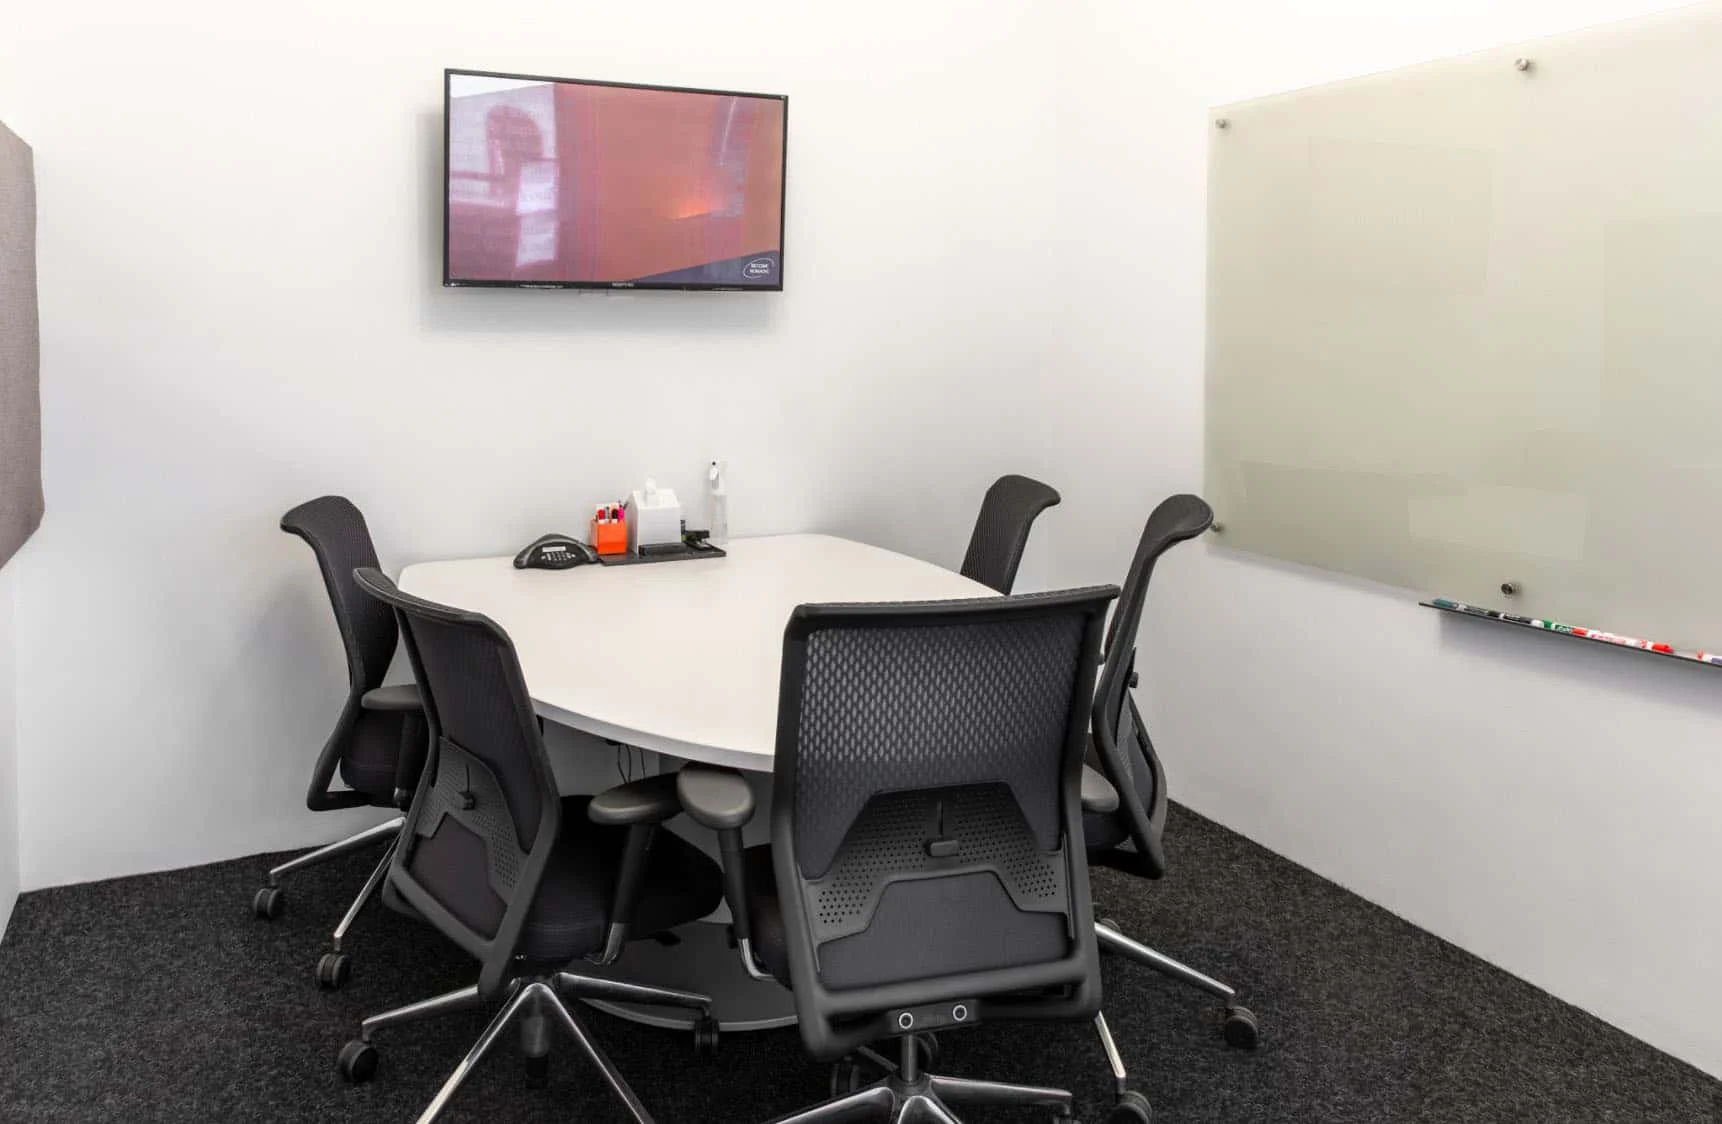 Fully-equipped Meeting Space Rentals to Make Great Presentations, Impress your Clients or Simply Brainstorm.